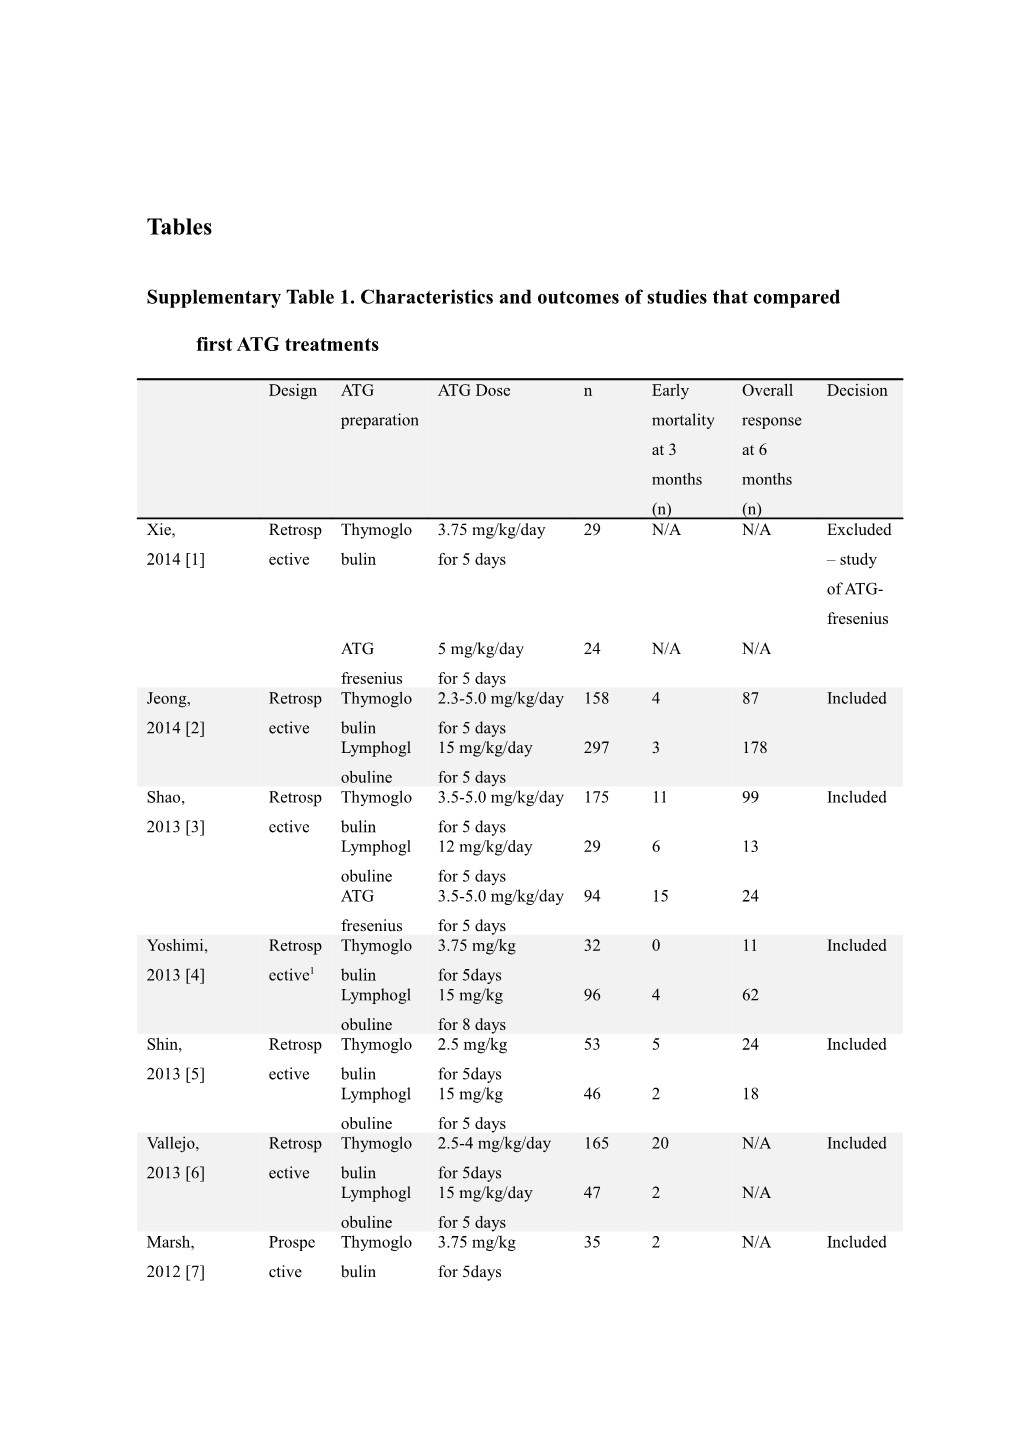 Supplementary Table 1. Characteristics and Outcomes of Studies That Compared First ATG